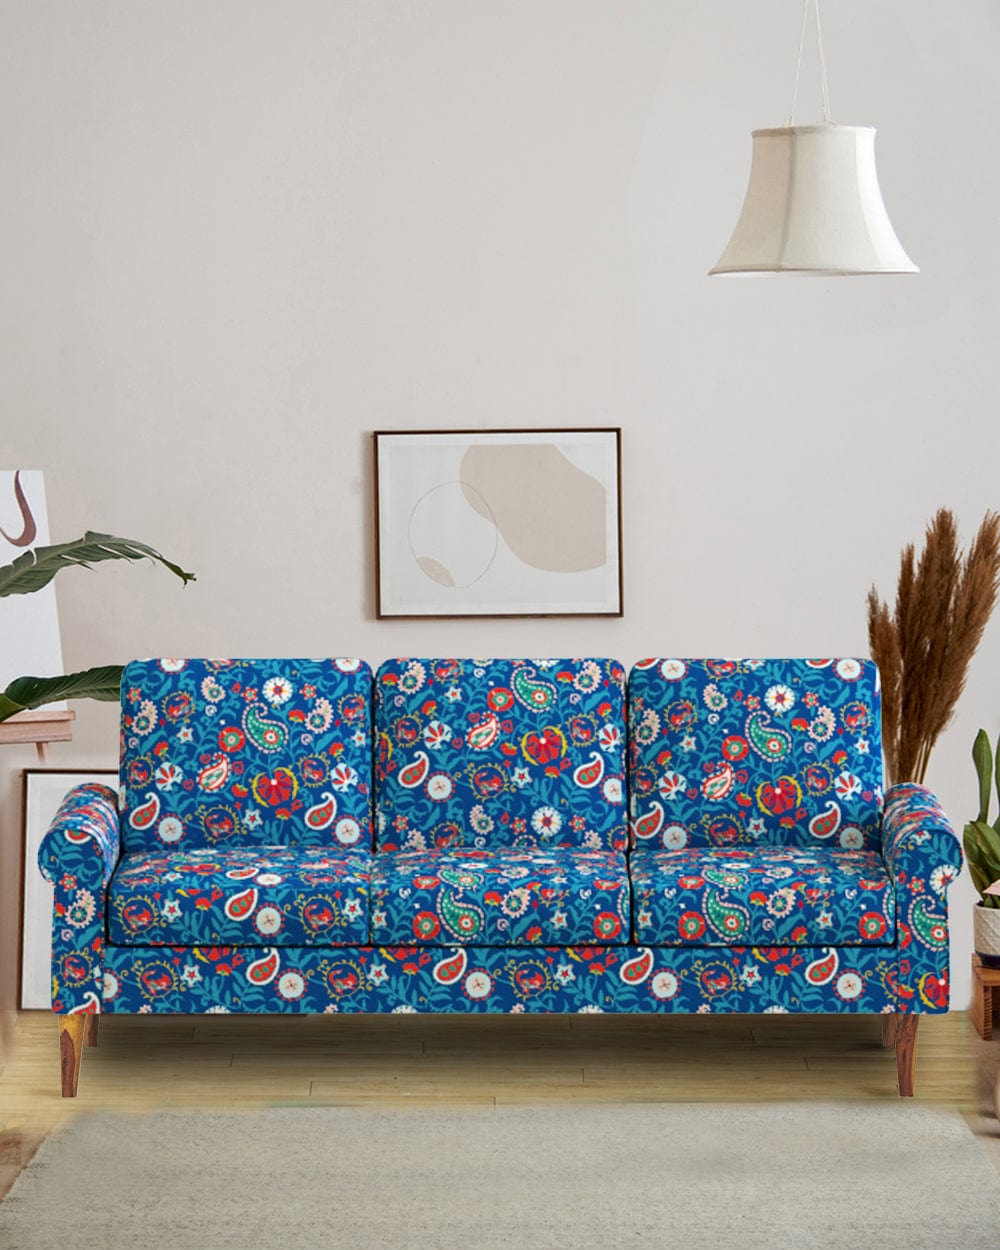 Chumbak Colonial Couch 3 Seater India Paisleys Blue